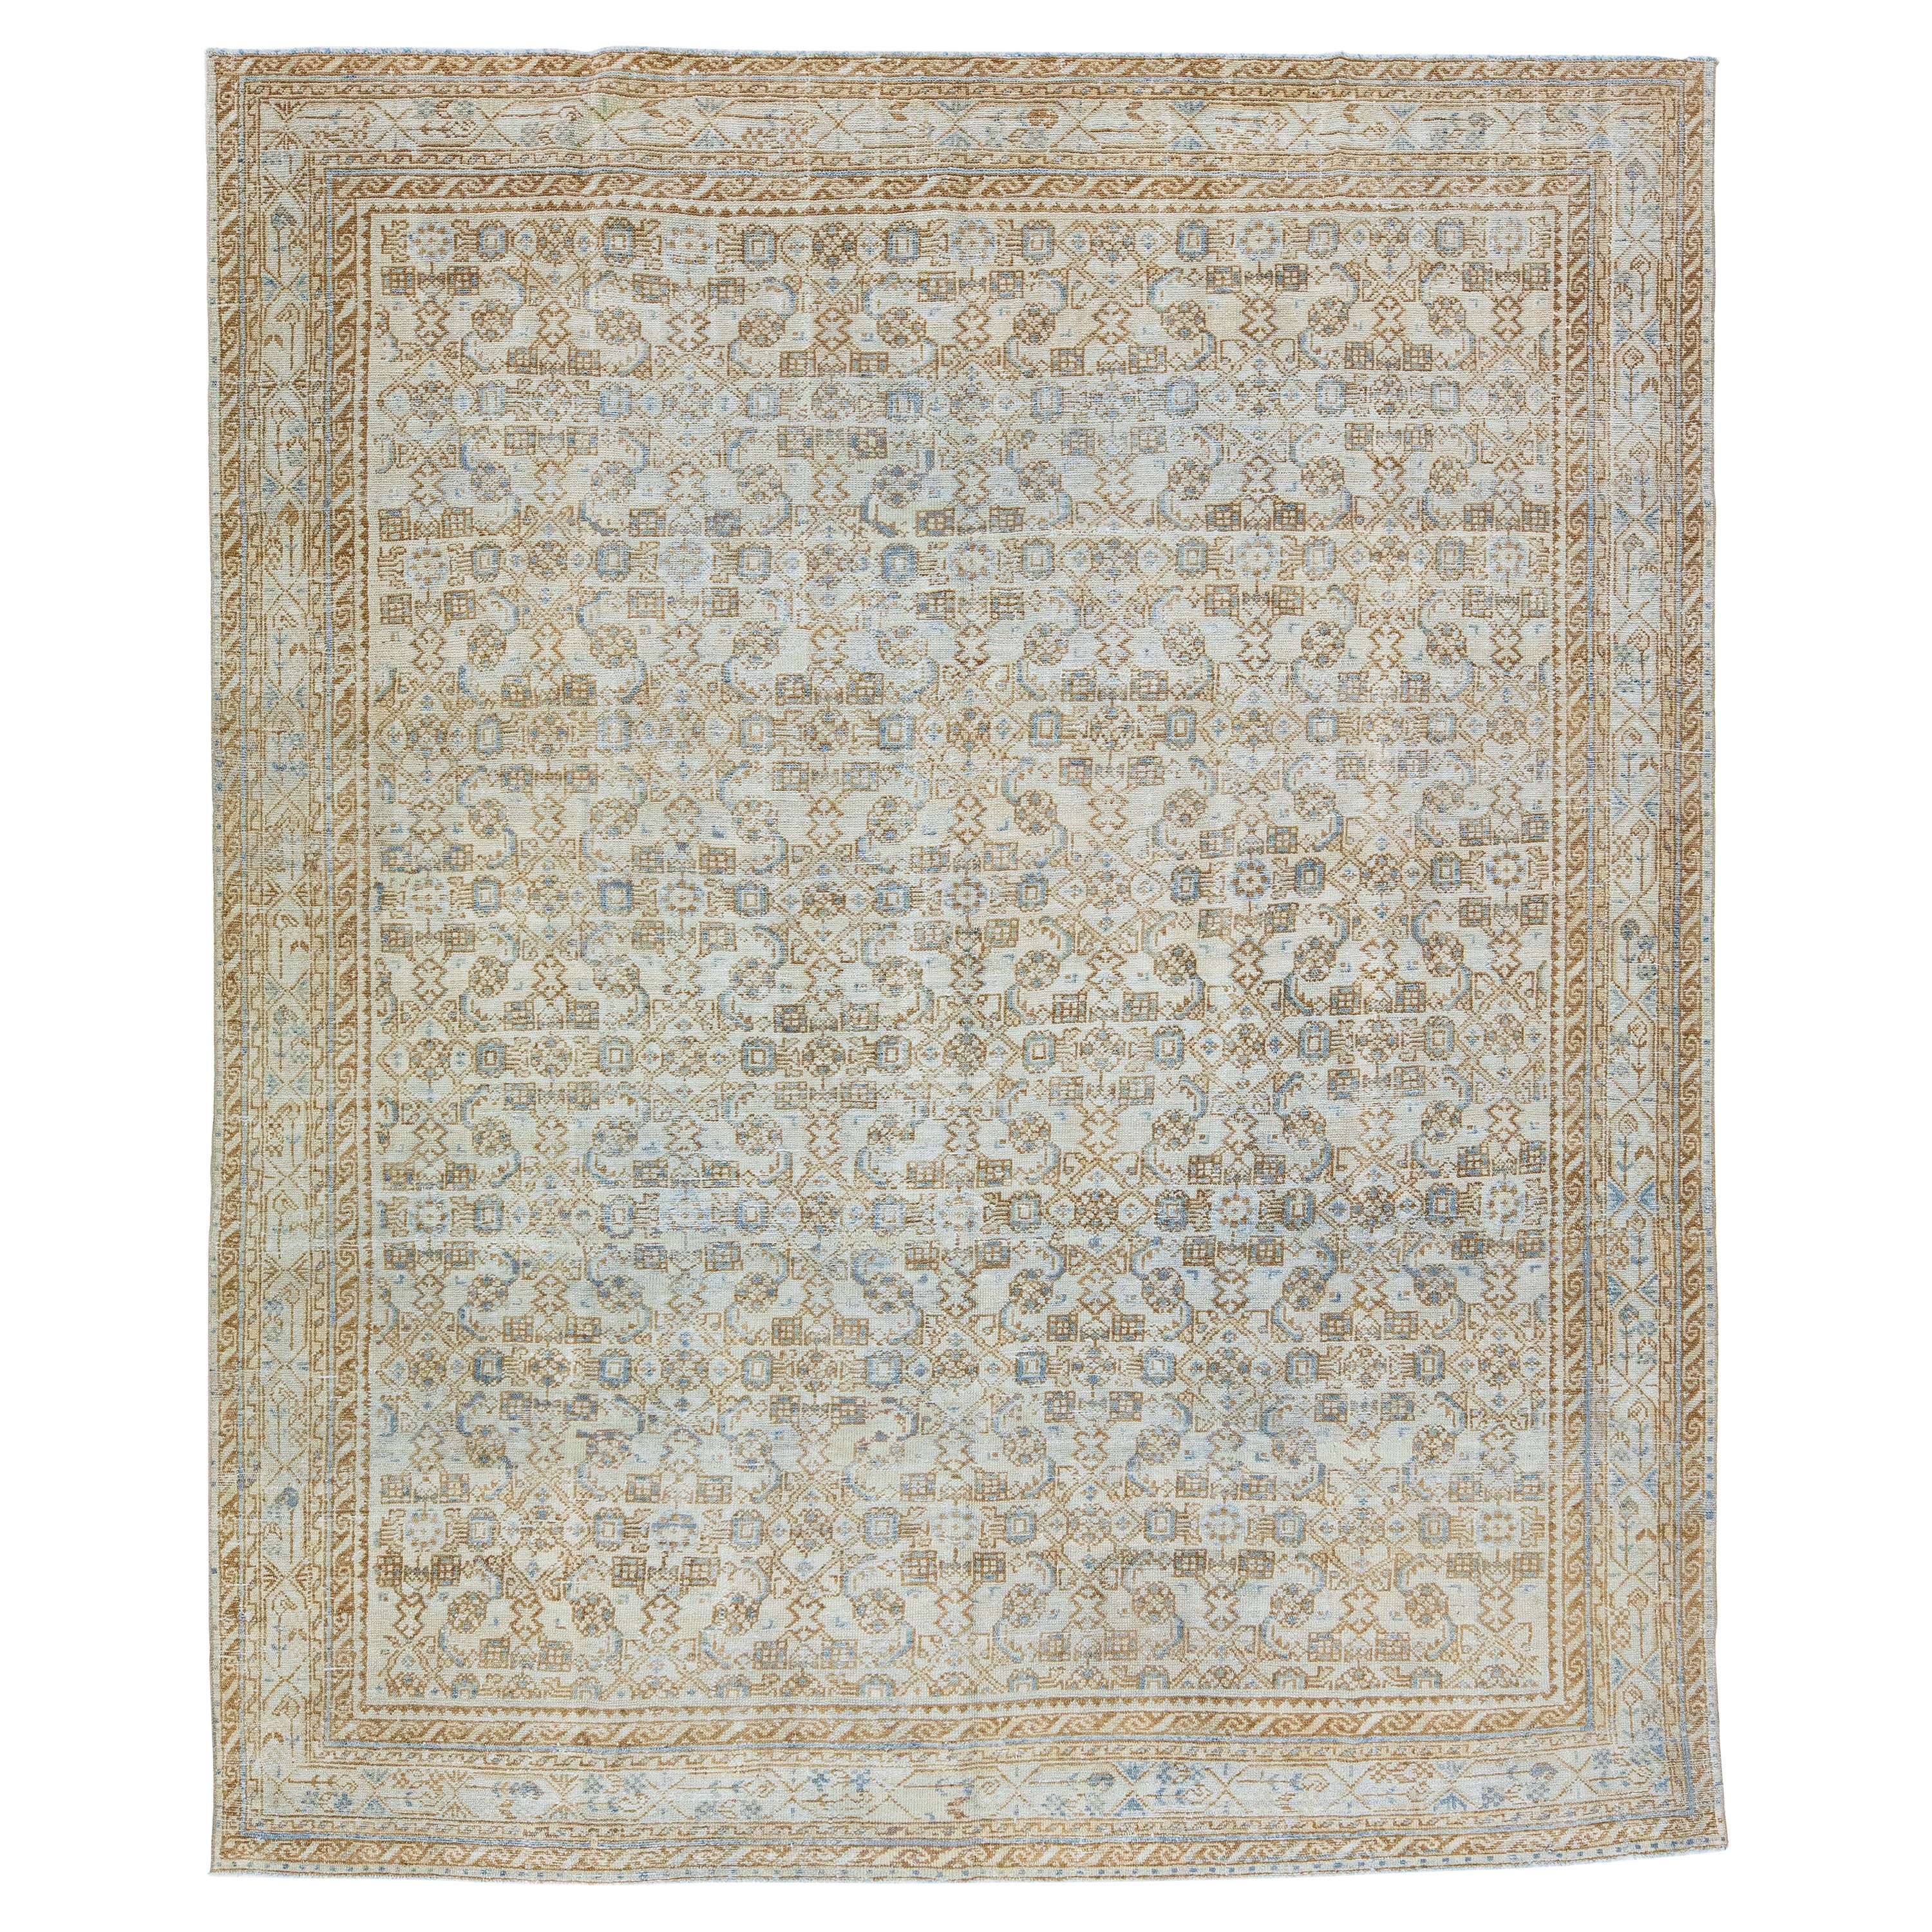 Antique Persian Mahal Wool Rug with Allover Design in Beige